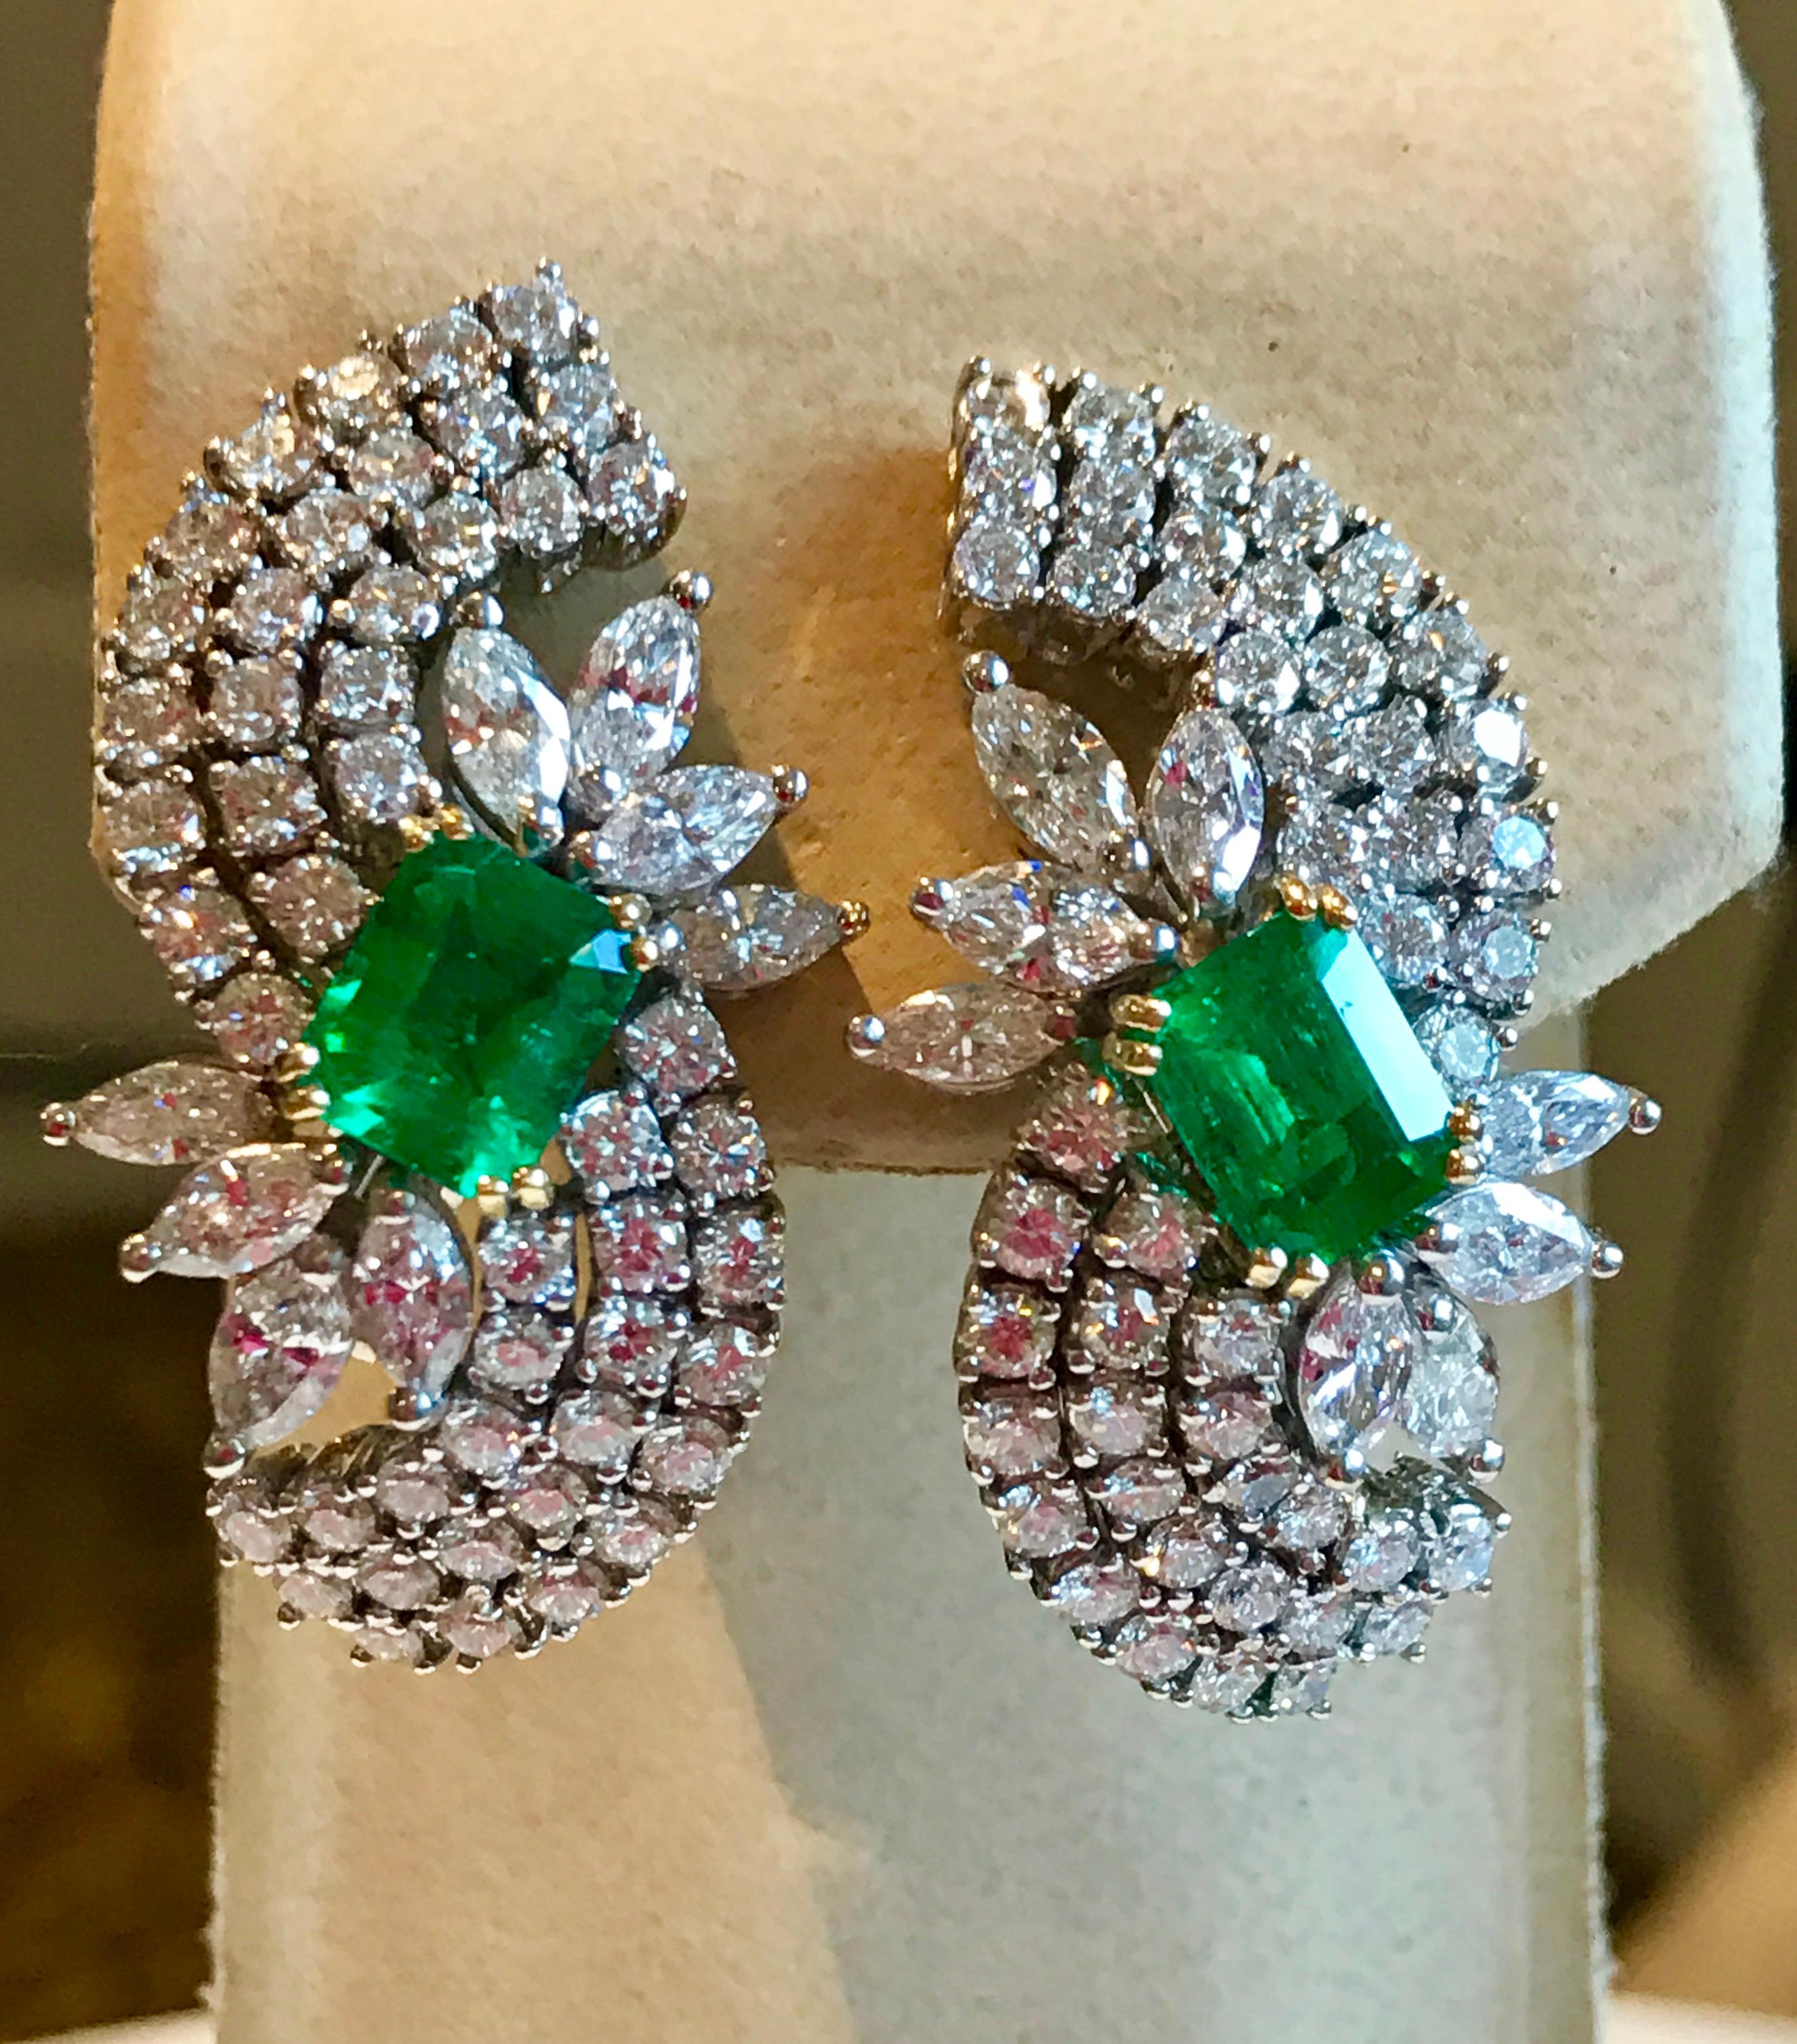 These exquisite Clip Earrings are a true masterpiece that showcases the finest of Colombian Emeralds. The earrings are EGL Certified and feature two fine Colombian Emerald Cut Emeralds, weighing approximately 4.5 carats. The color and clarity of the